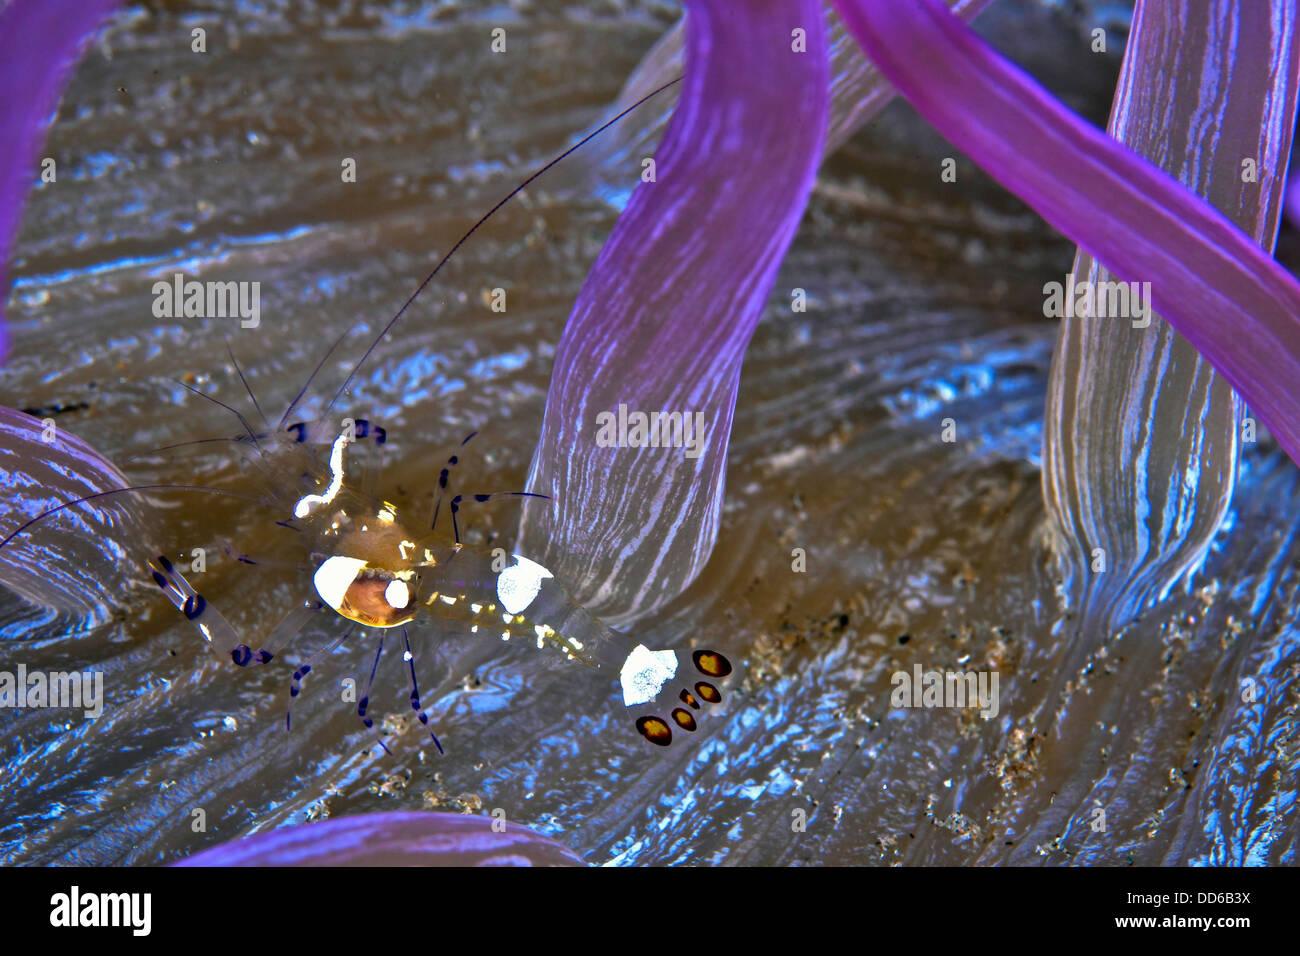 Anemone shrimp foraging among purple tentacles of host anemone. Stock Photo